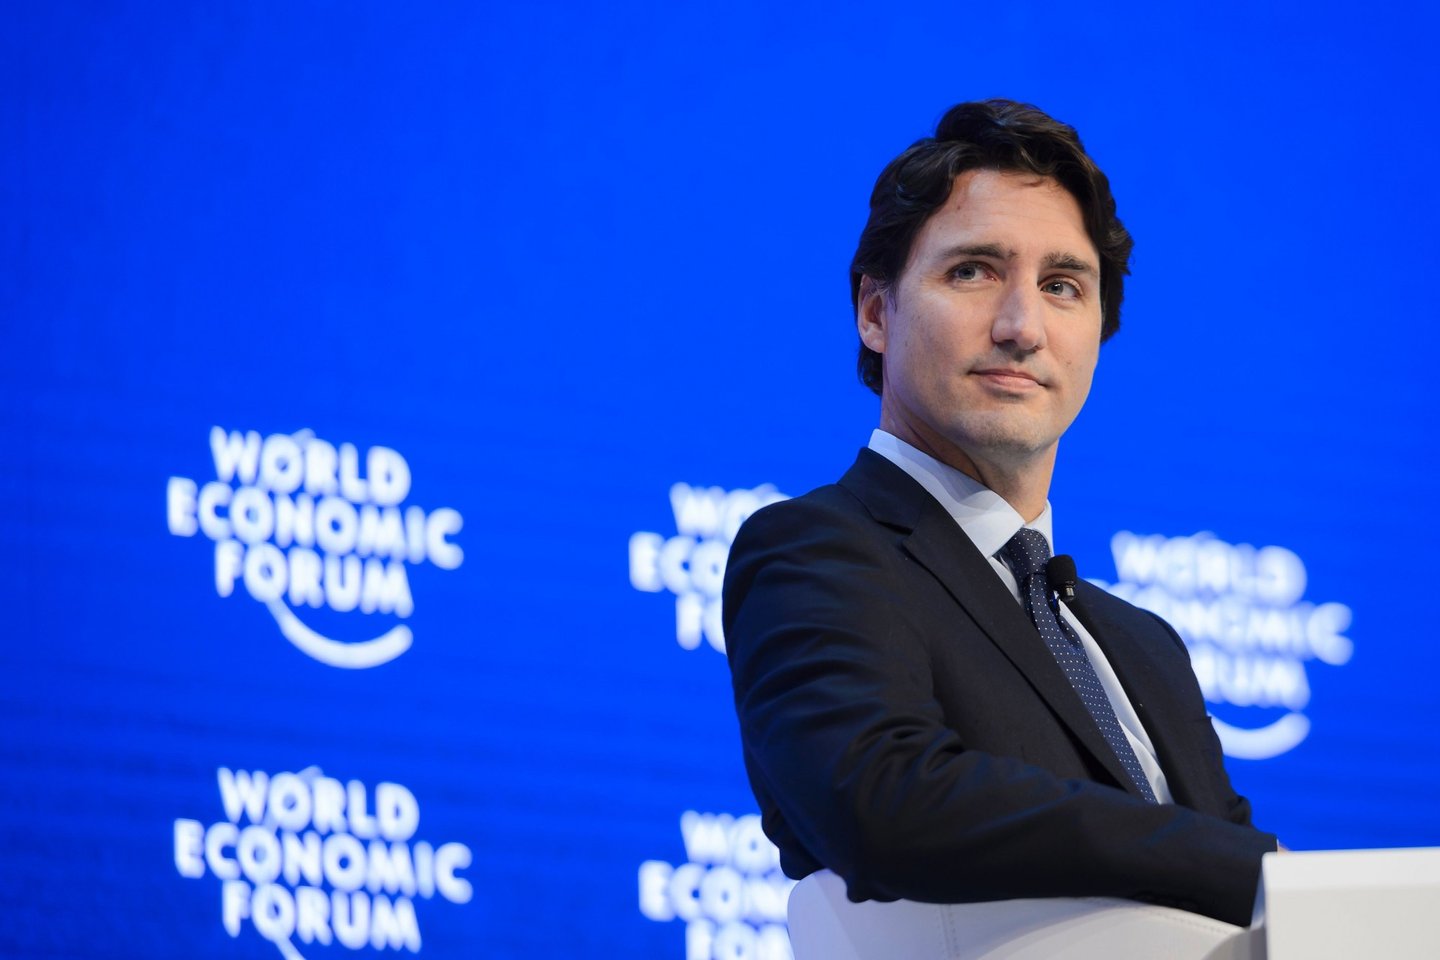 Canadian Prime Minister Justin Trudeau looks on  during a session of the World Economic Forum (WEF) annual meeting in Davos, on January 20, 2016. A string of jihadist attacks and rising risks to the global economy overshadow the opening of the annual gathering of the world's rich and powerful in a snow-blanketed Swiss ski resort. Even as heads of state, billionaires and Hollywood megastar Leonardo DiCaprio were arriving, the International Monetary Fund (IMF) sounded the alarm on January 19, 2016 about perils in the major emerging market economies and lowered its outlook for global economic growth this year. / AFP / FABRICE COFFRINI        (Photo credit should read FABRICE COFFRINI/AFP/Getty Images)